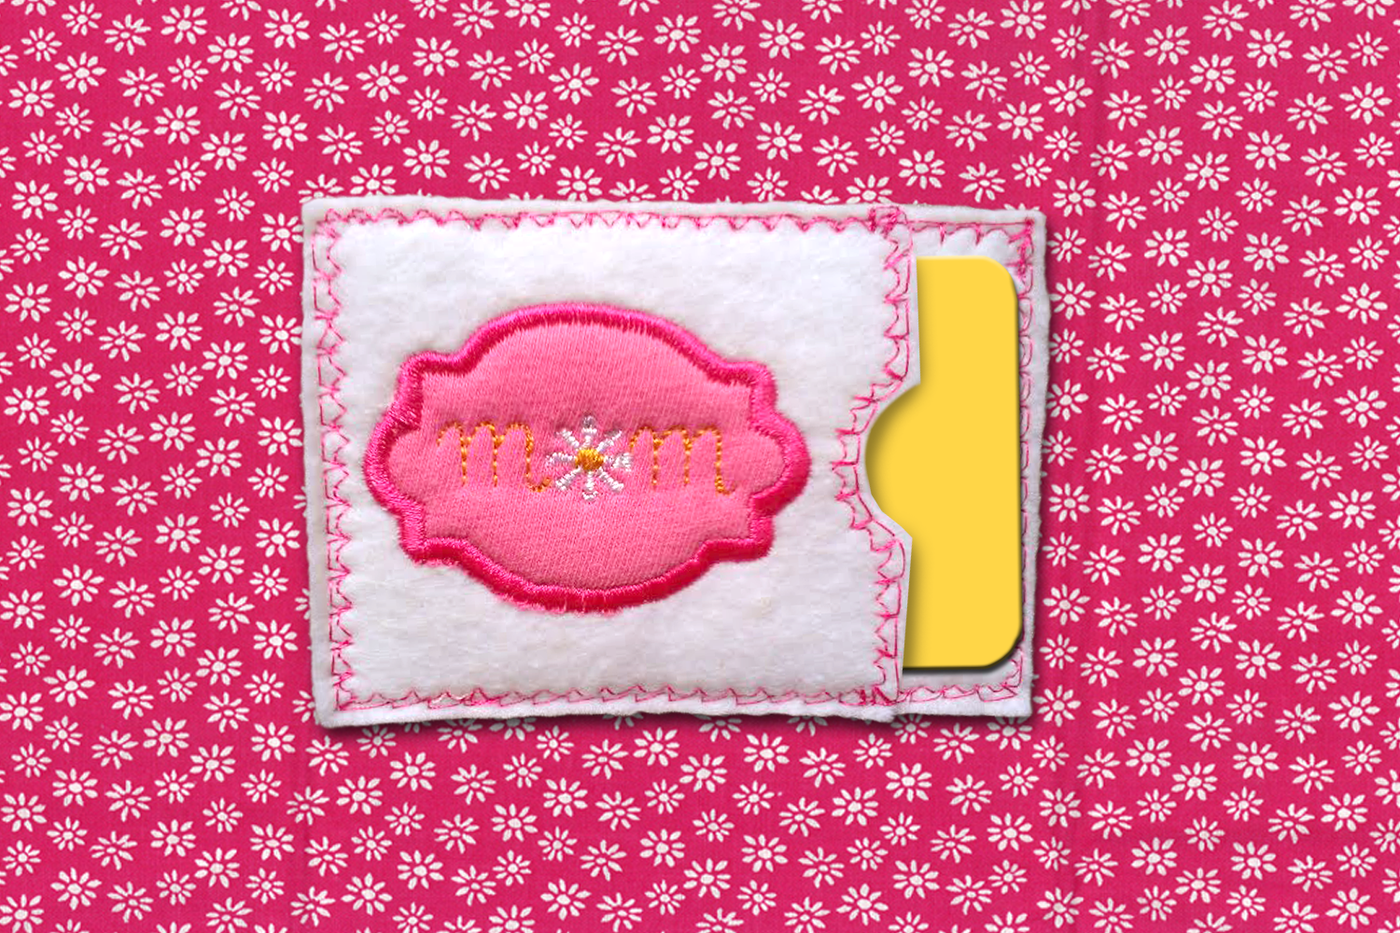 Felt gift card holder. It says "MOM" with a flower for the O and a decorative applique frame around the word.